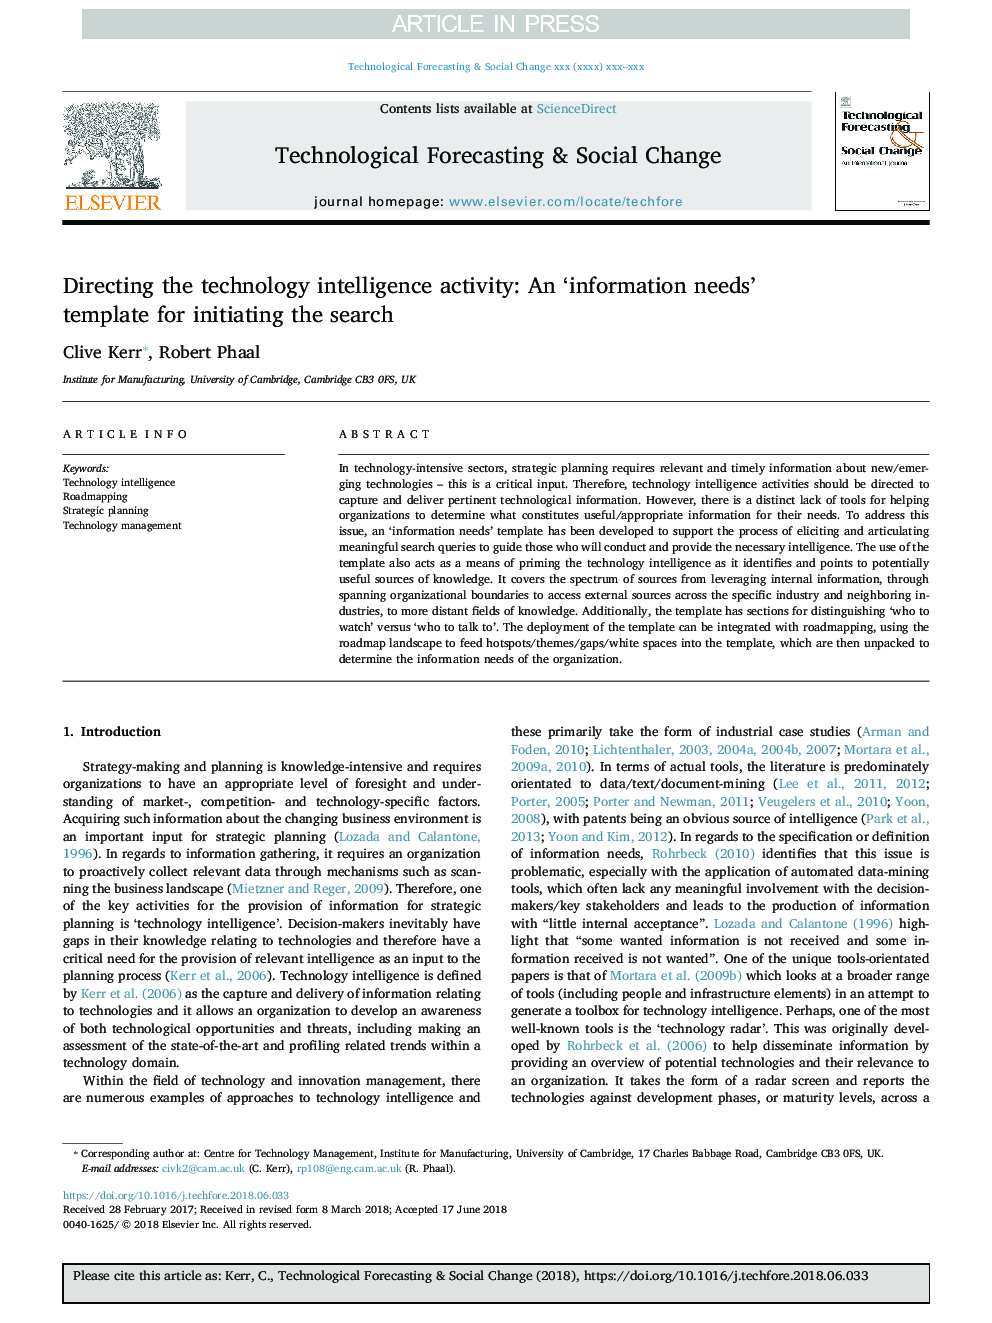 Directing the technology intelligence activity: An 'information needs' template for initiating the search